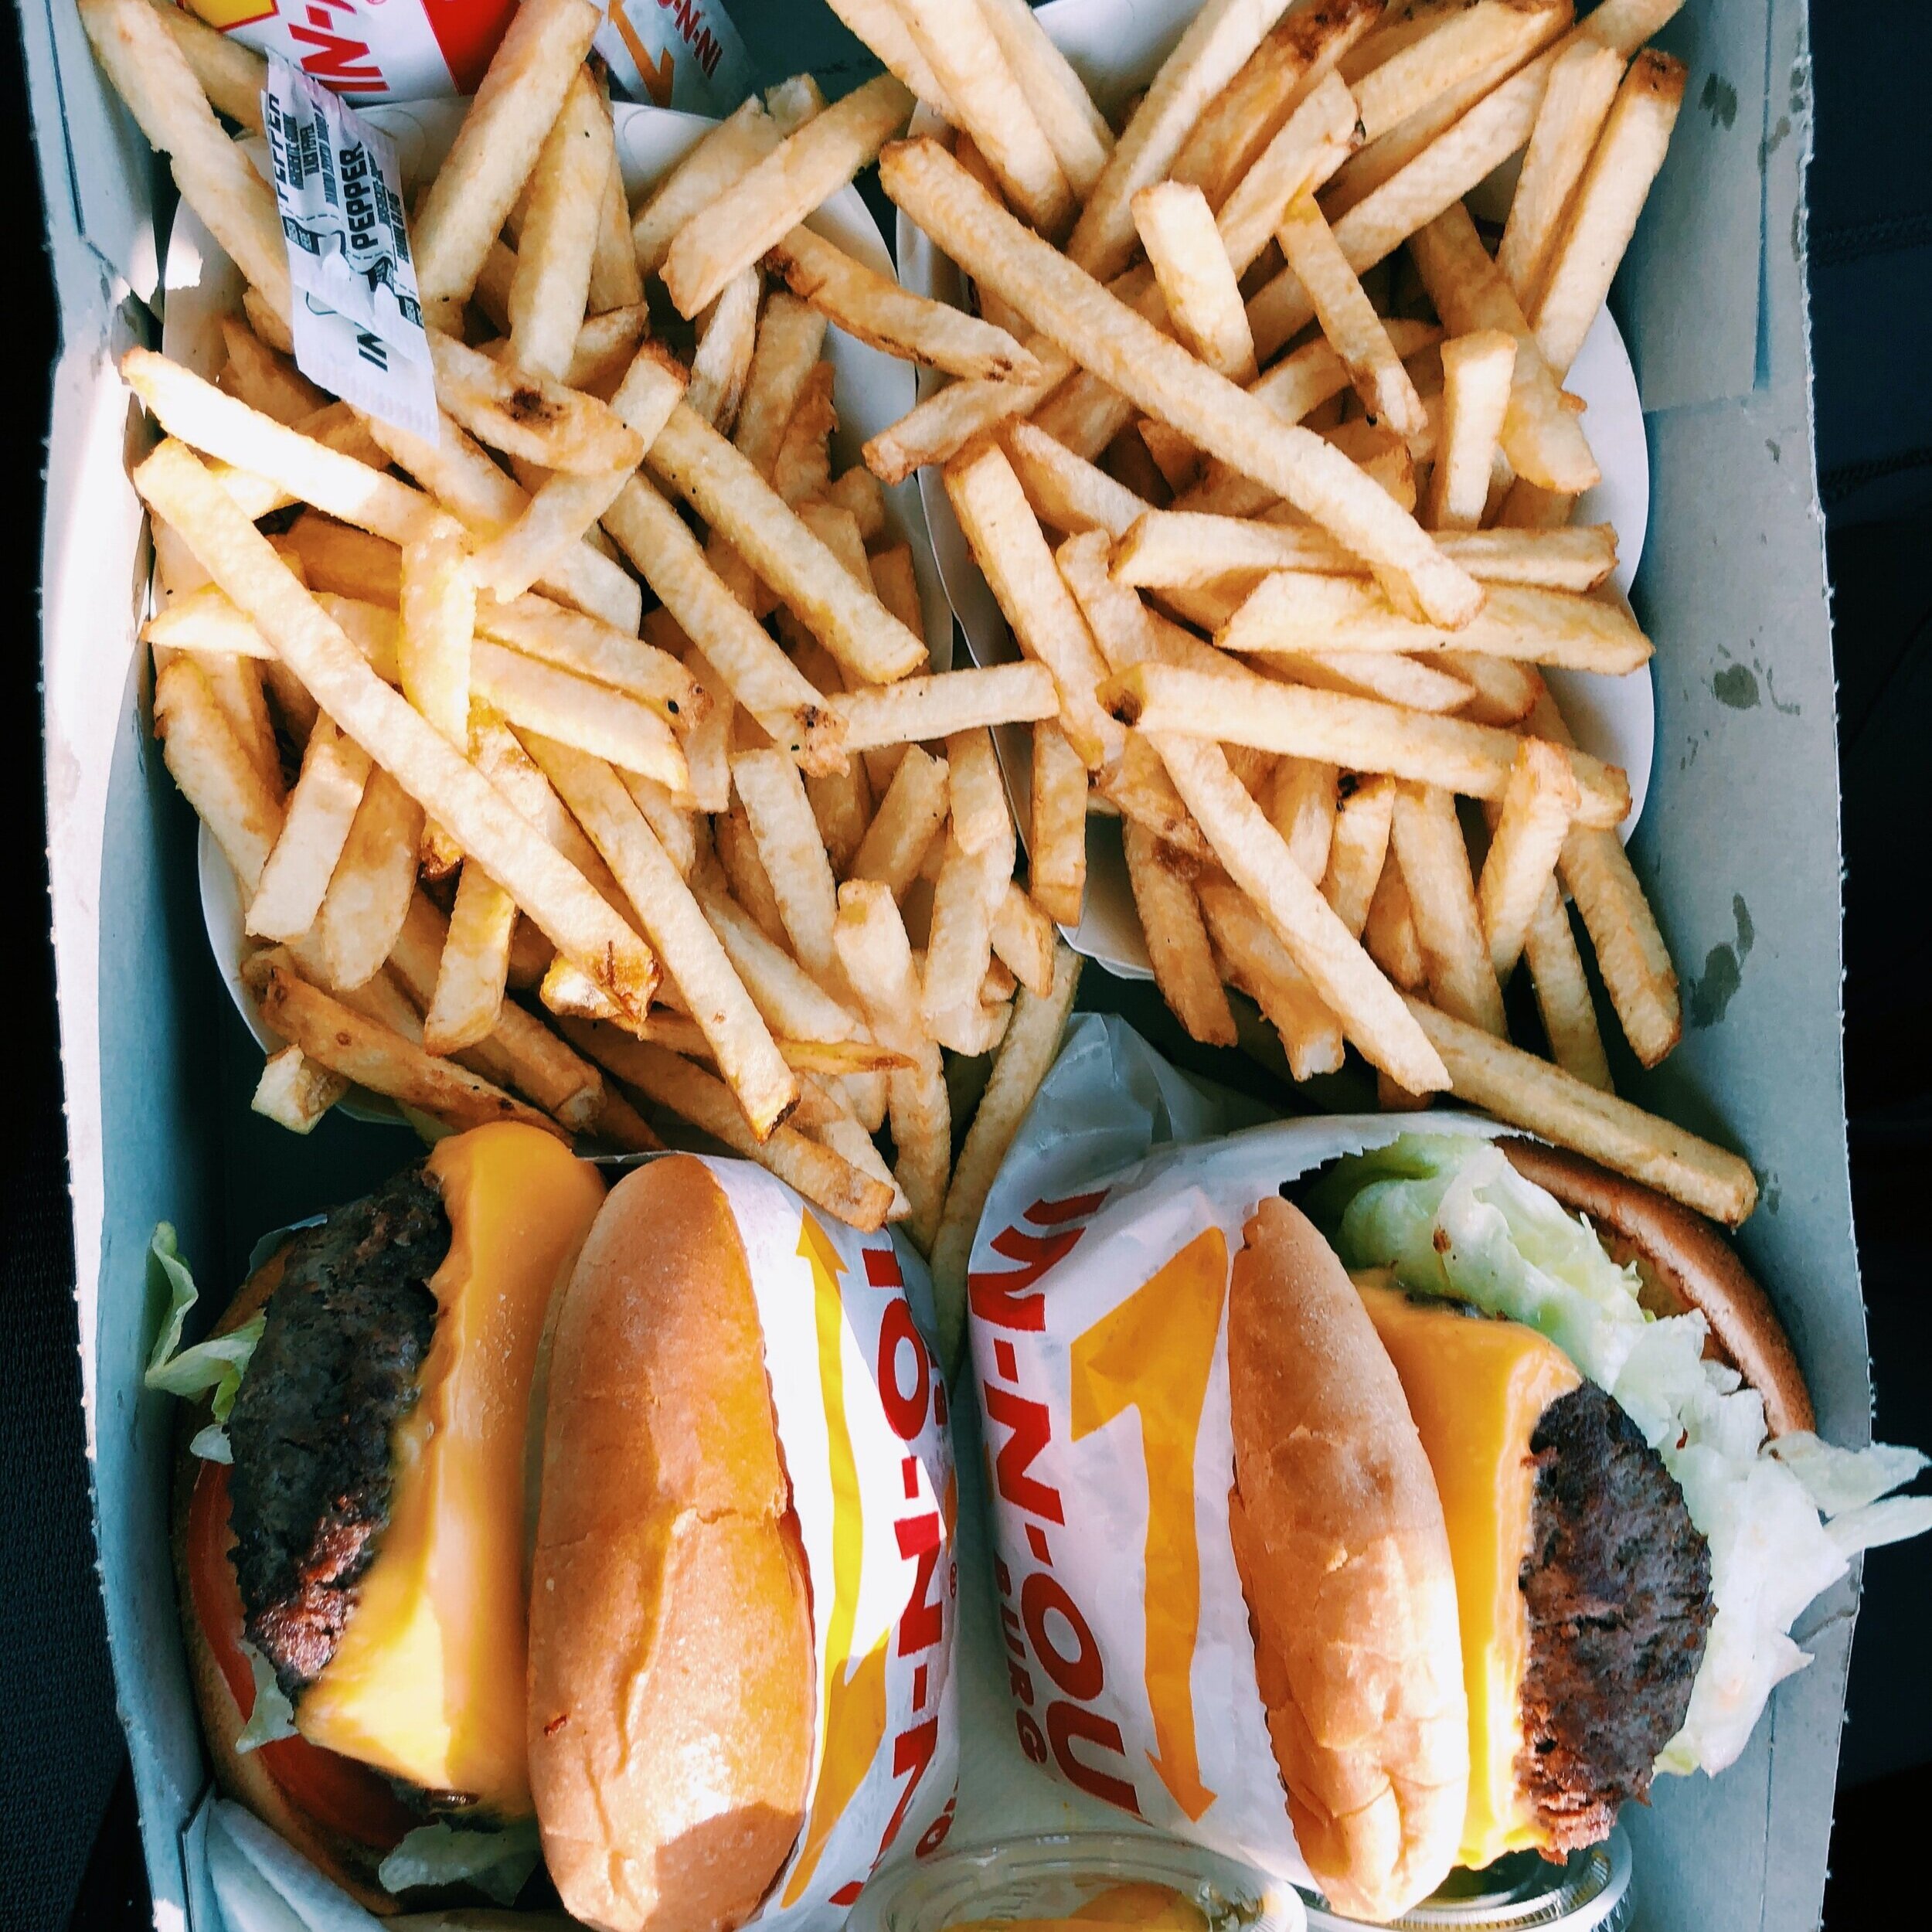 two burgers with fries